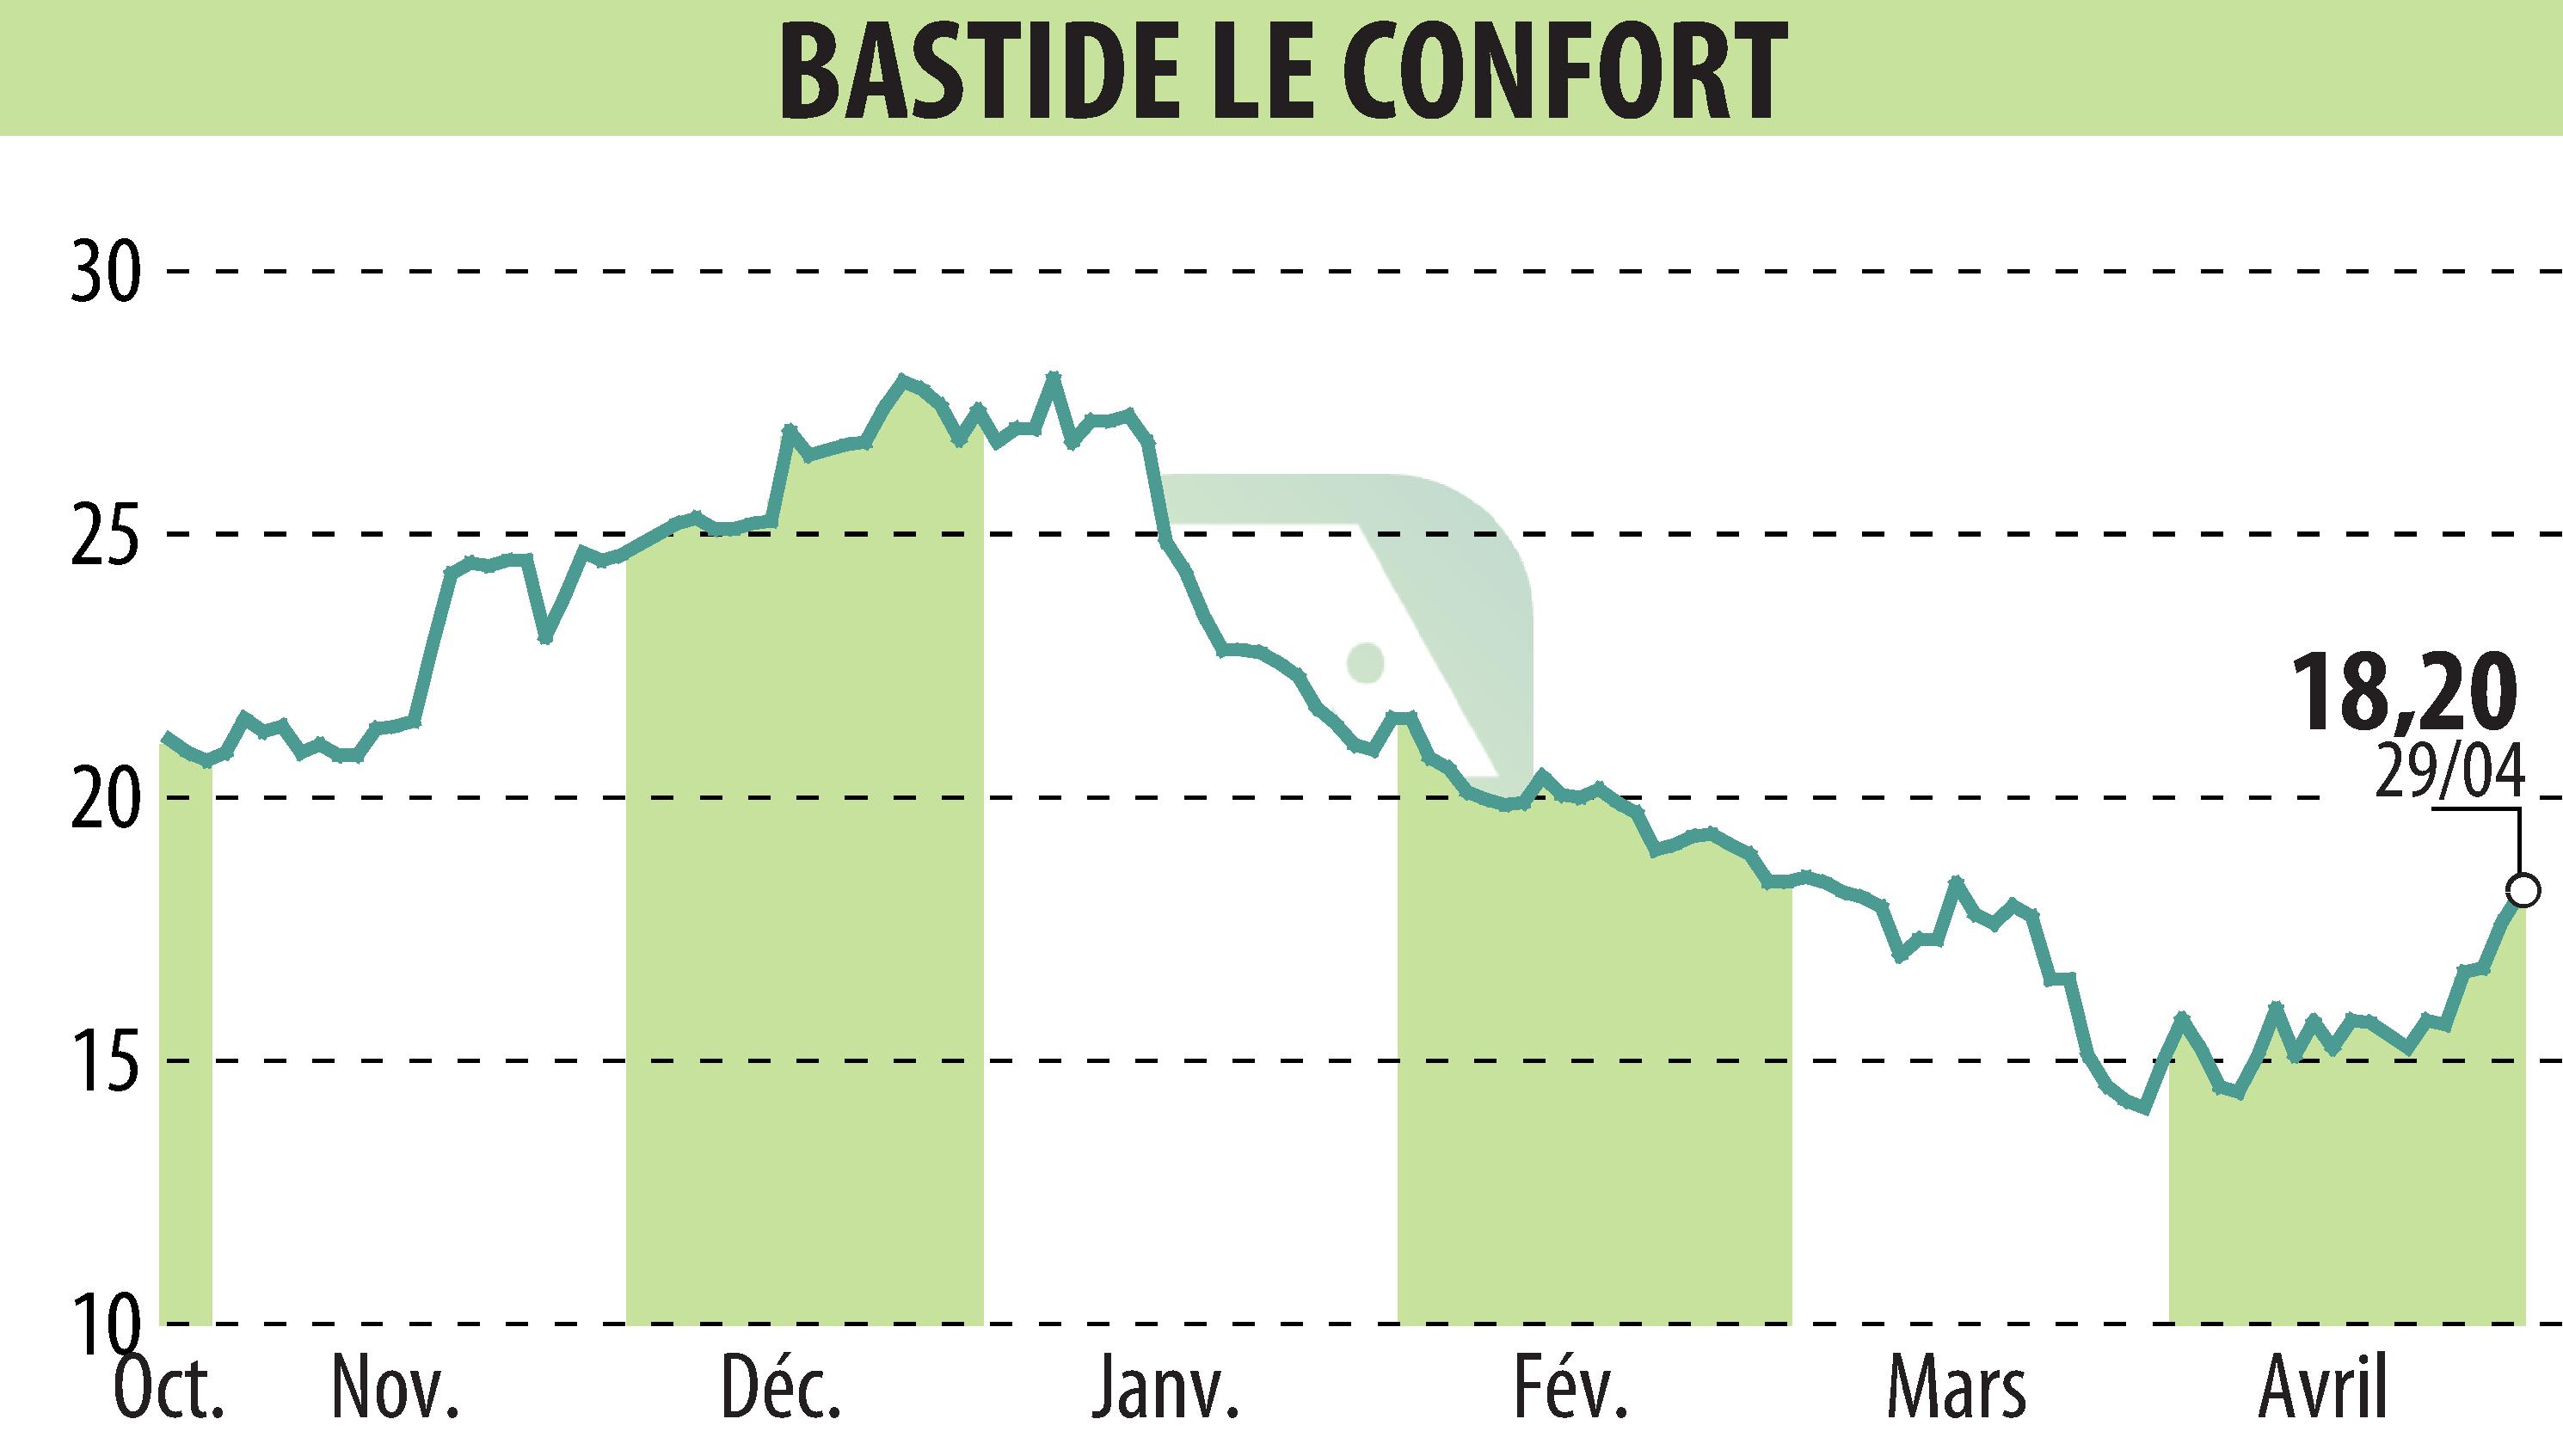 Stock price chart of BASTIDE (EPA:BLC) showing fluctuations.